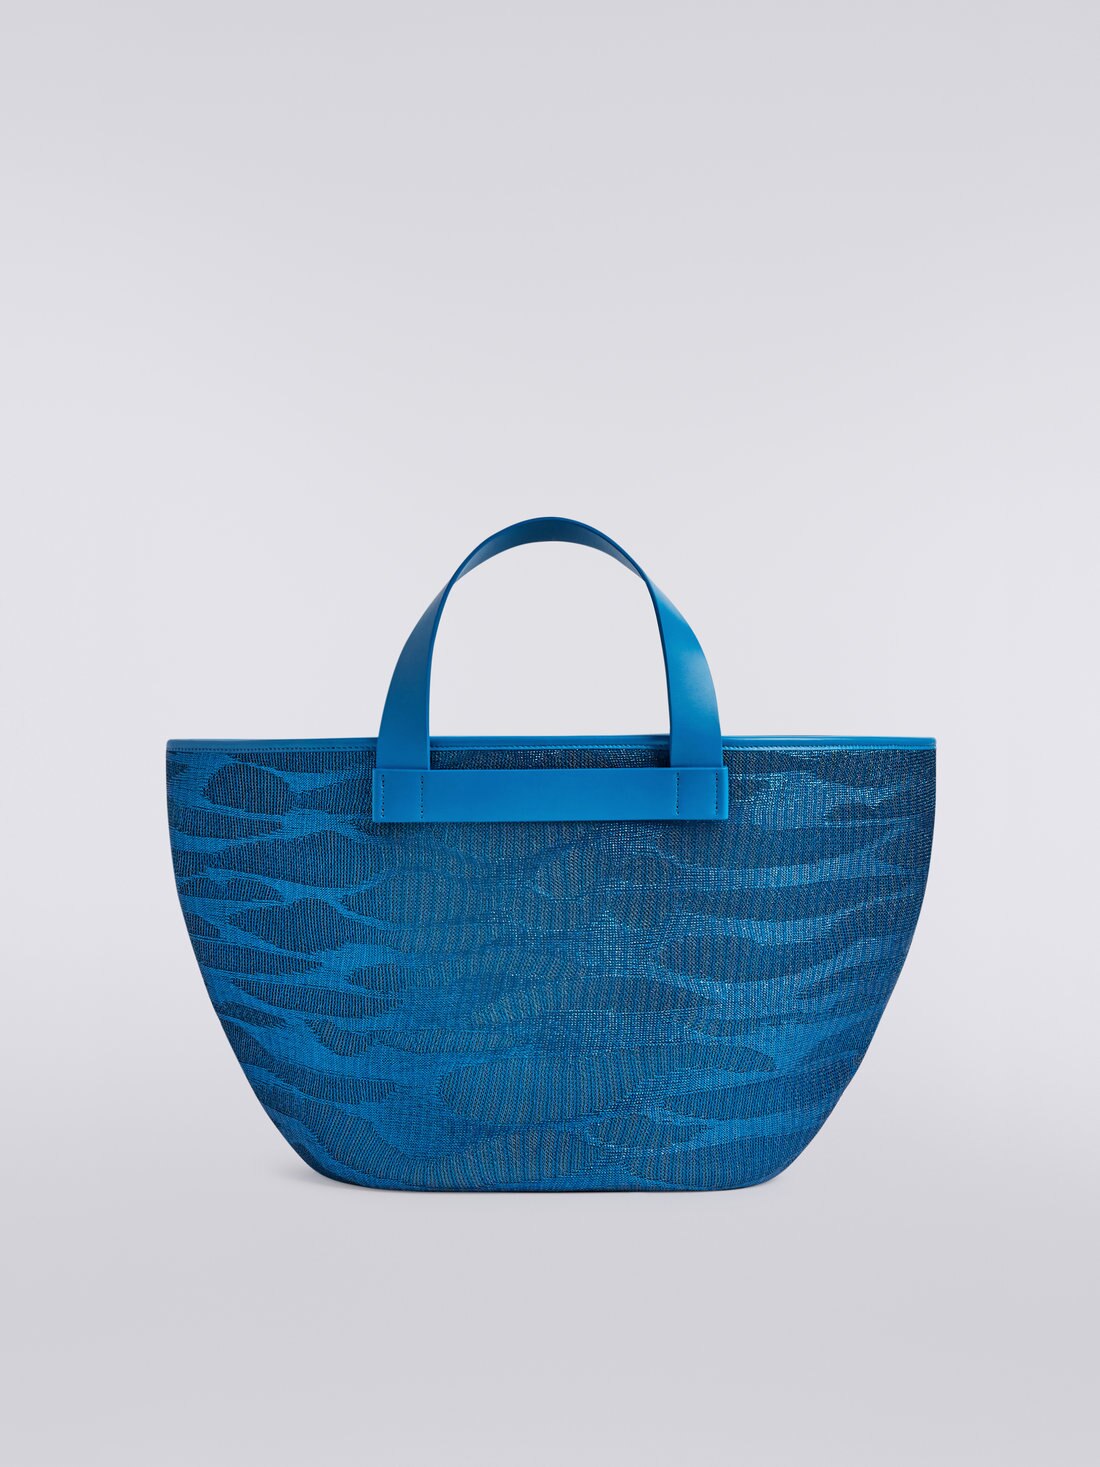 Jacquard viscose knit tote with leather handles, Blue - 8051575966187 - 2